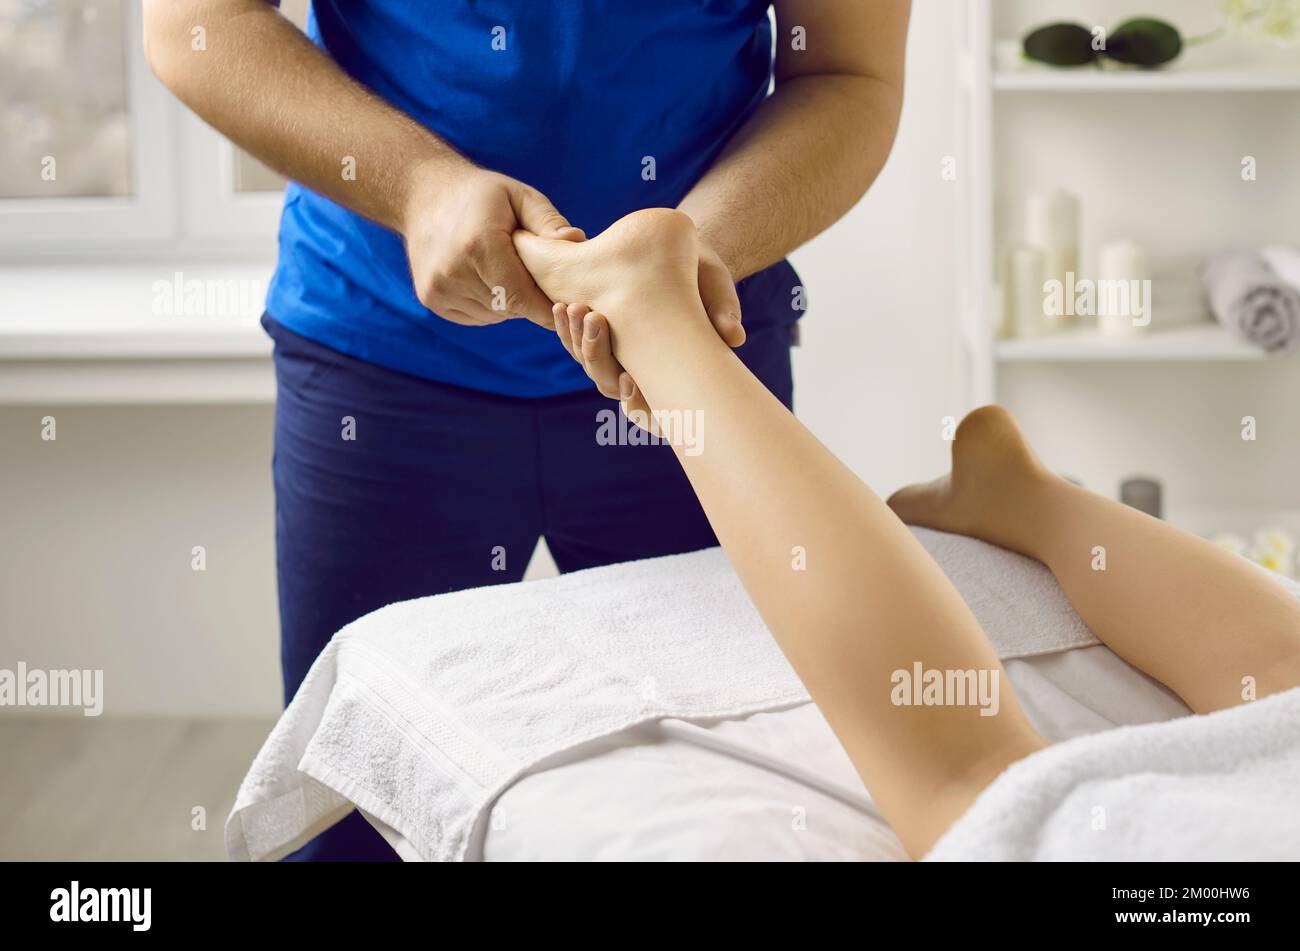 Male masseur in health clinic or massage parlor does hand massage of young woman's feet. Stock Photo